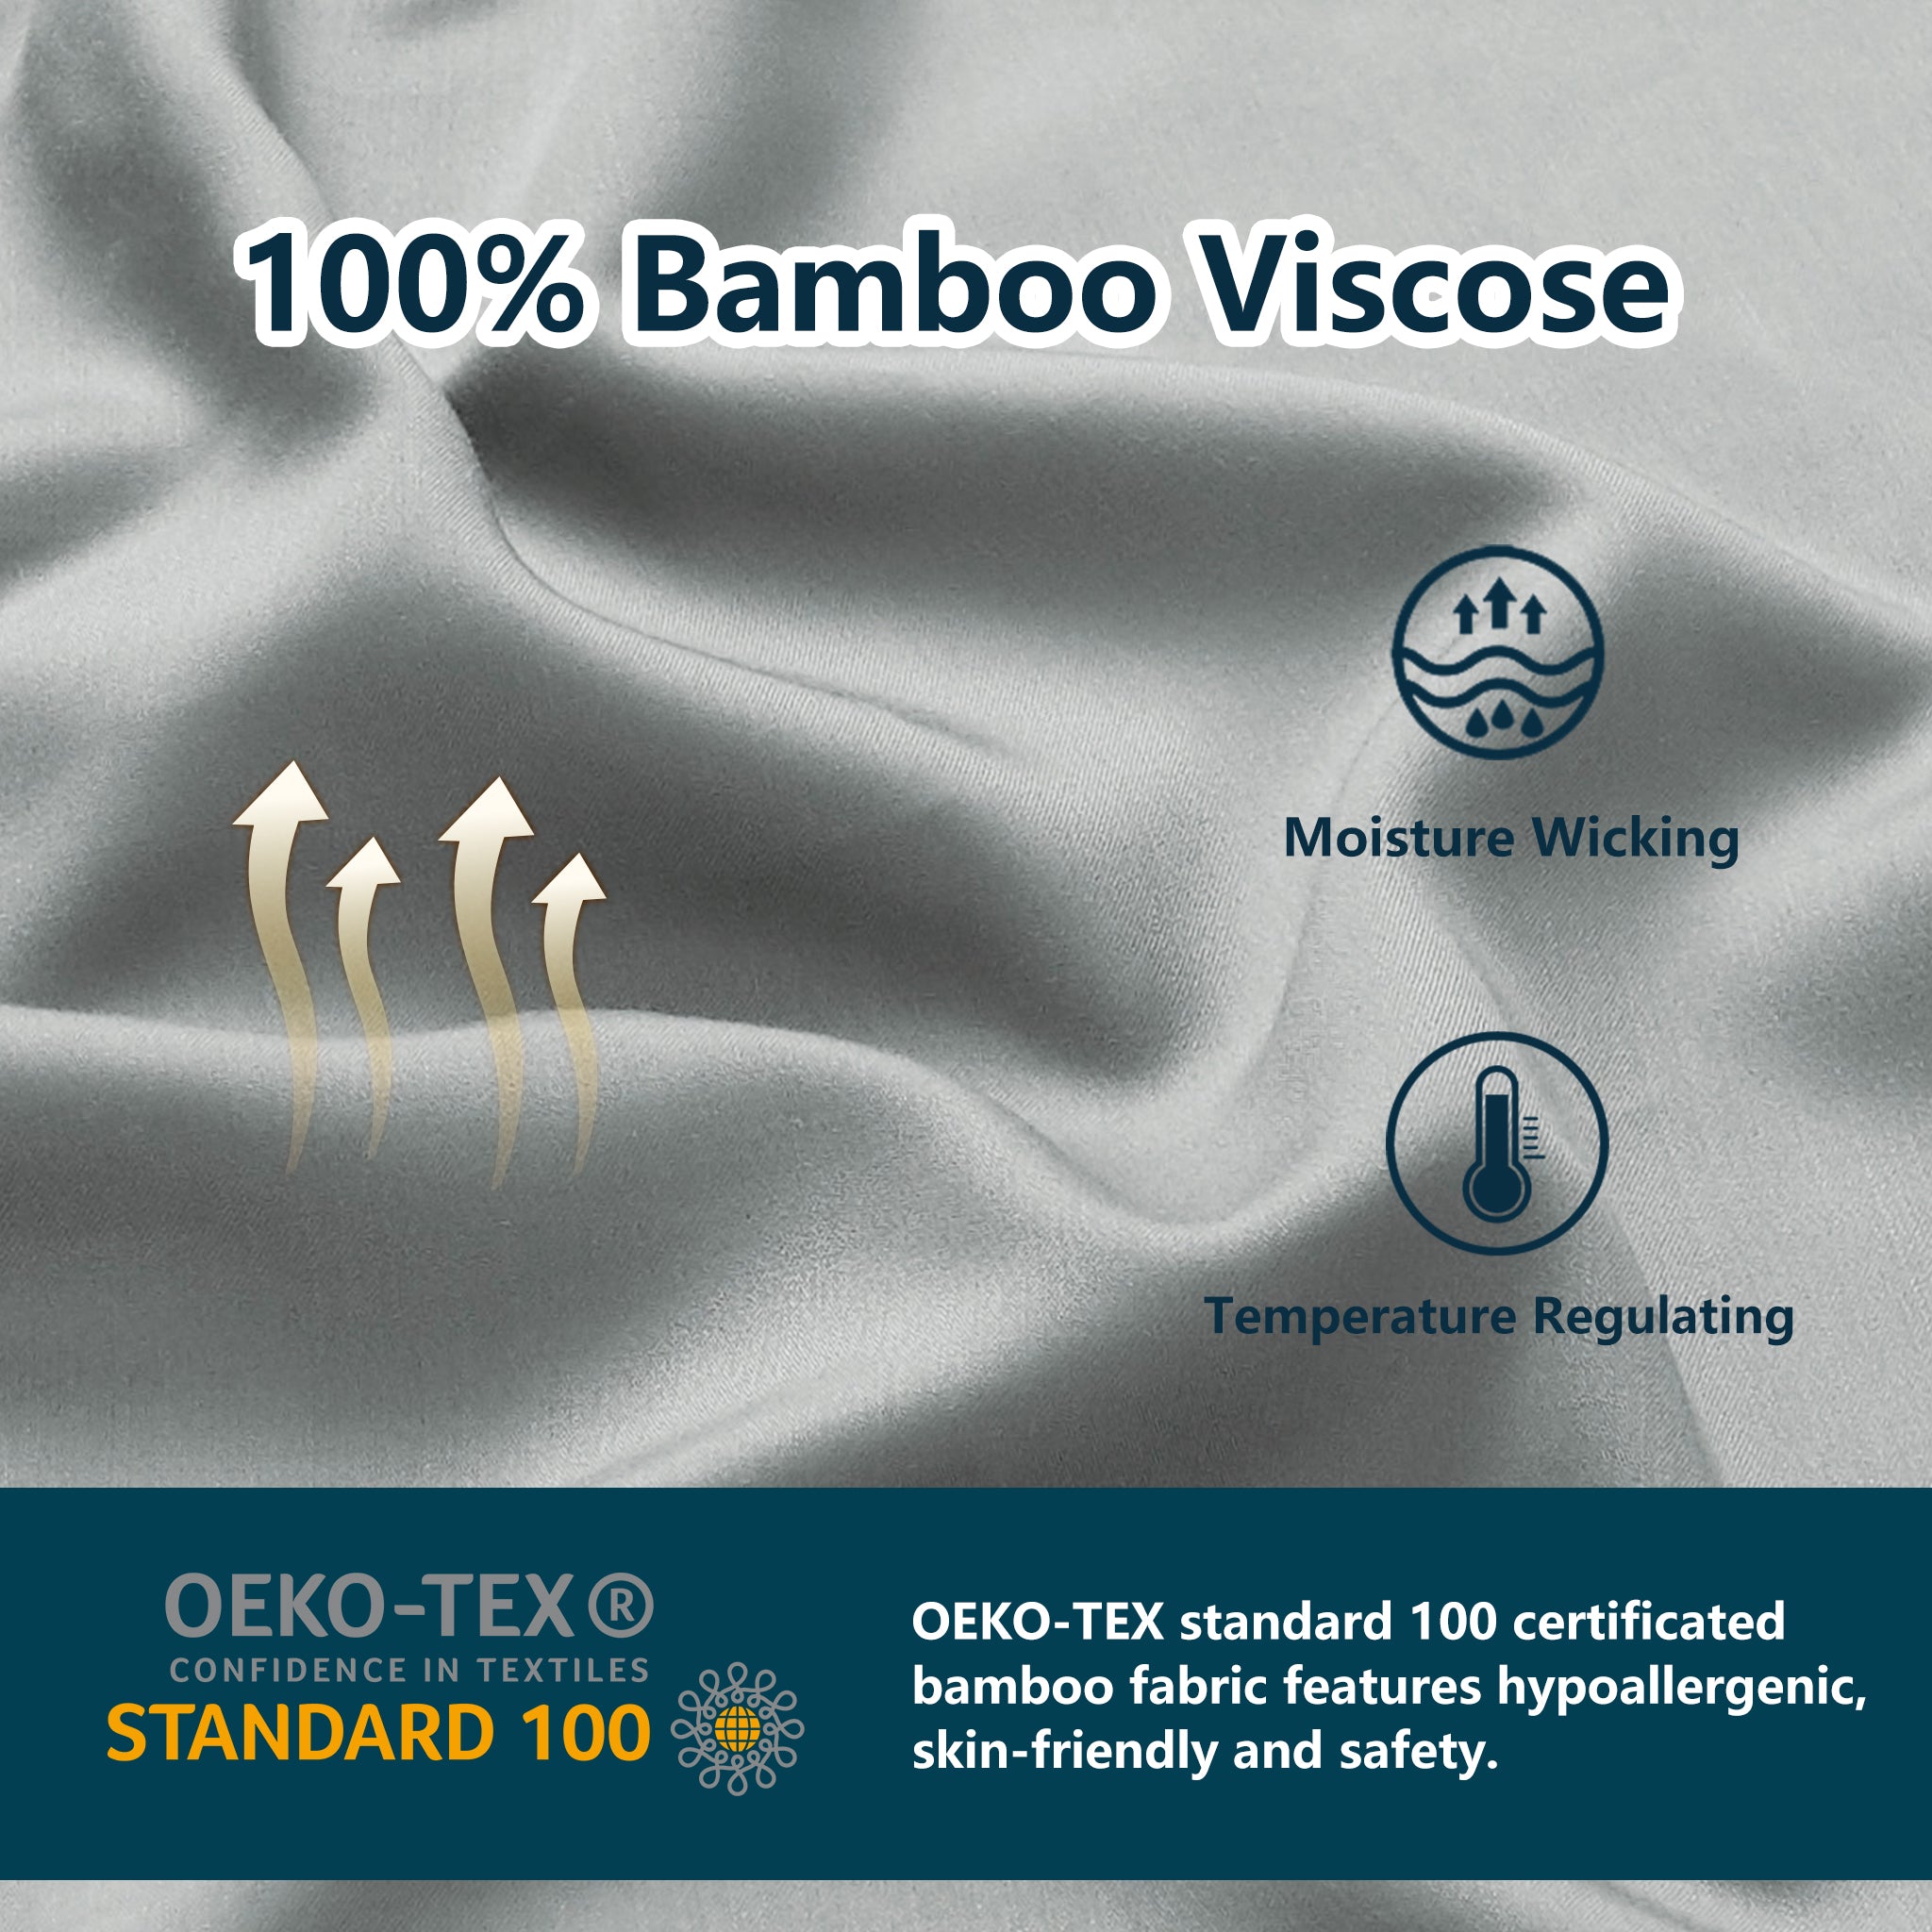 CozyLux 100% Organic Bamboo Sheets Queen Size White 300 Thread Count Oeko-Tex Certified Cooling Bed Sheets Set for Night Sweats 4pcs with 16 Deep POC